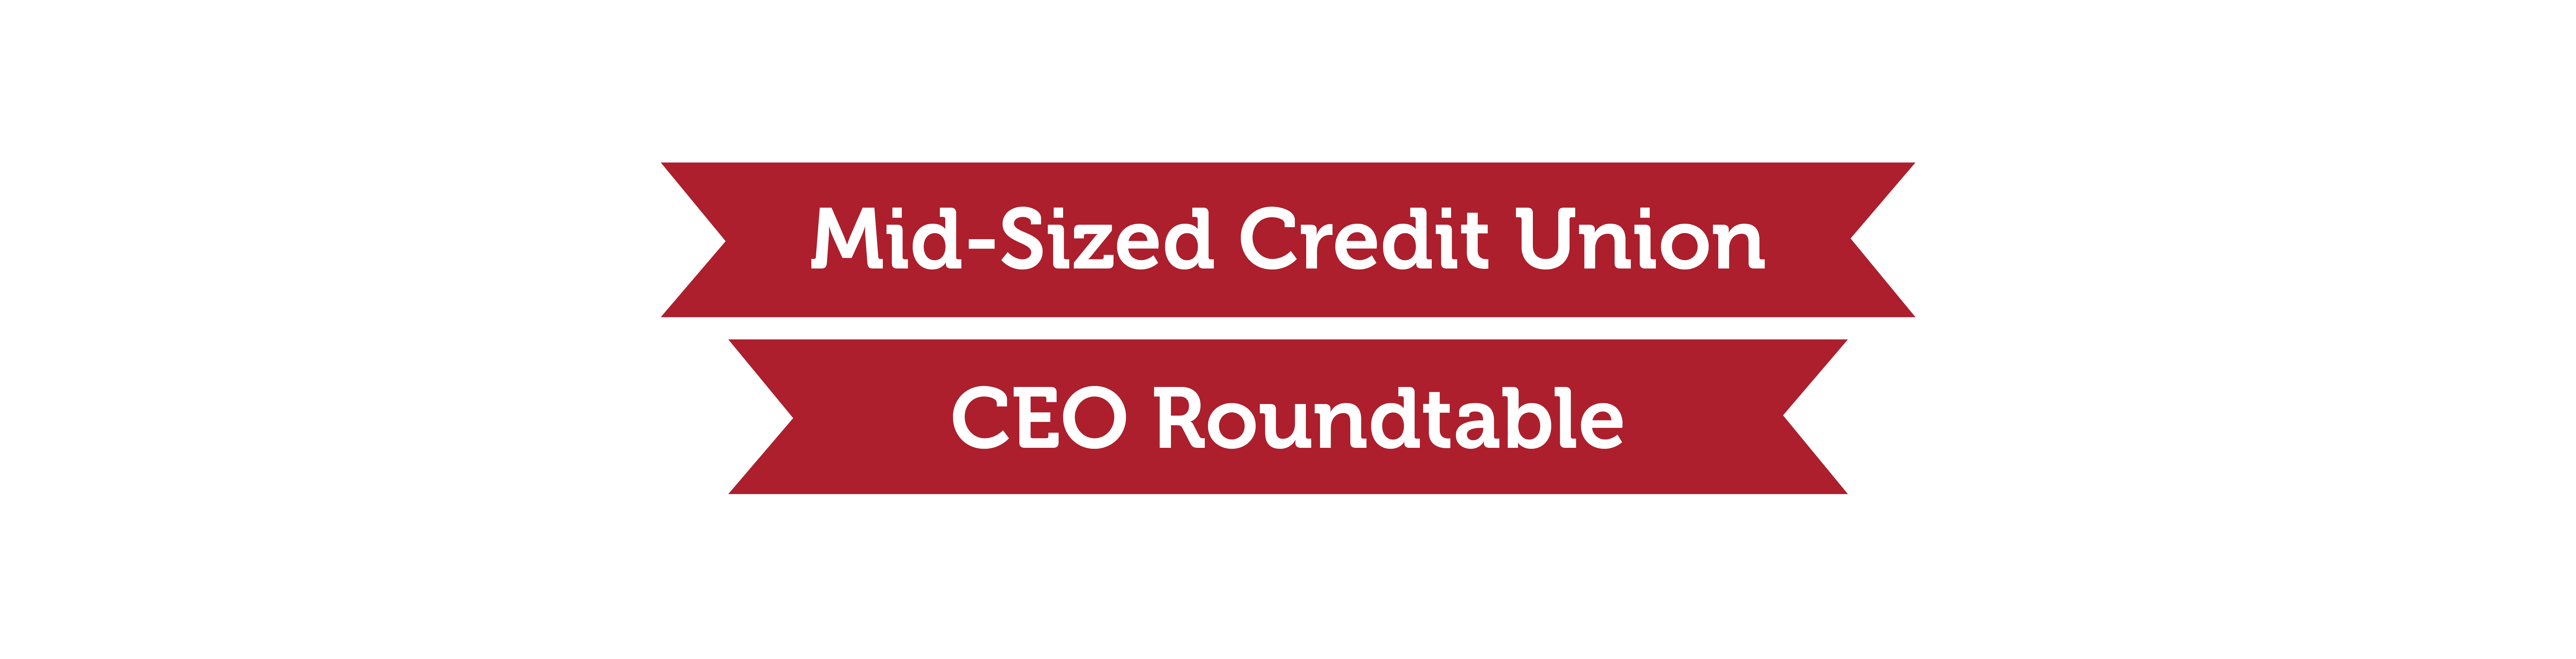 Mid-Sized credit union CEO Roundtable